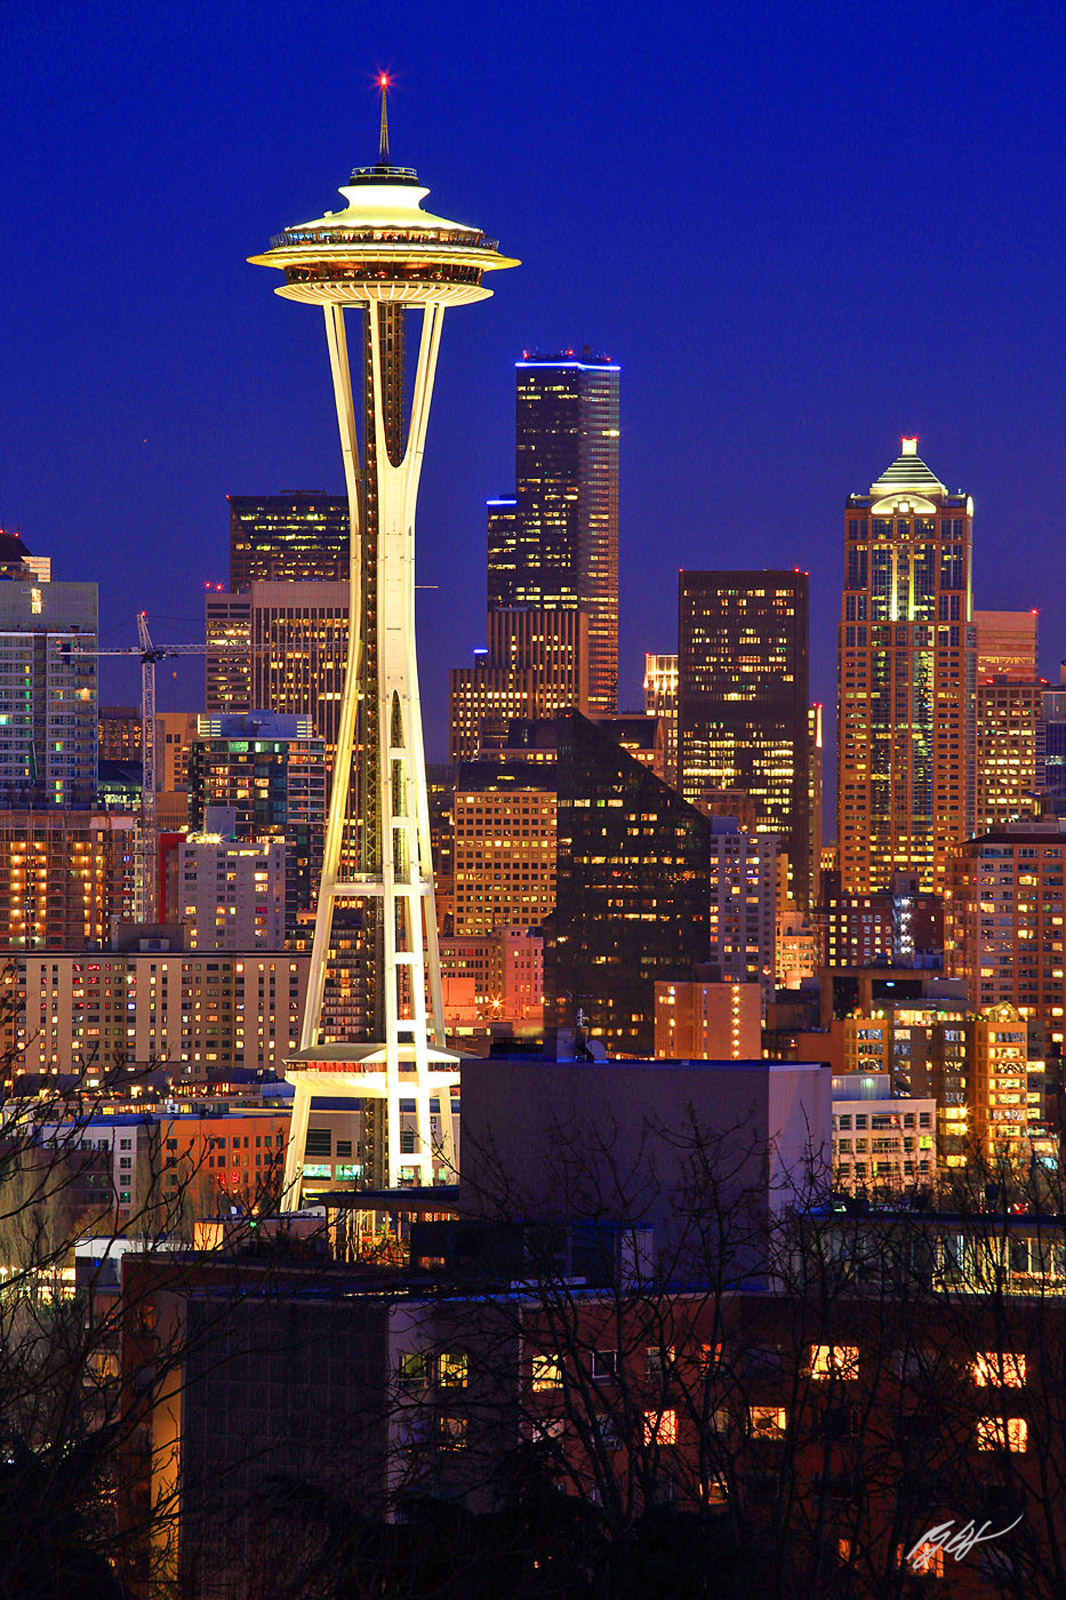 Space Needle at Night from Kerry Park on Queen Ann Hill in Seattle, Washington